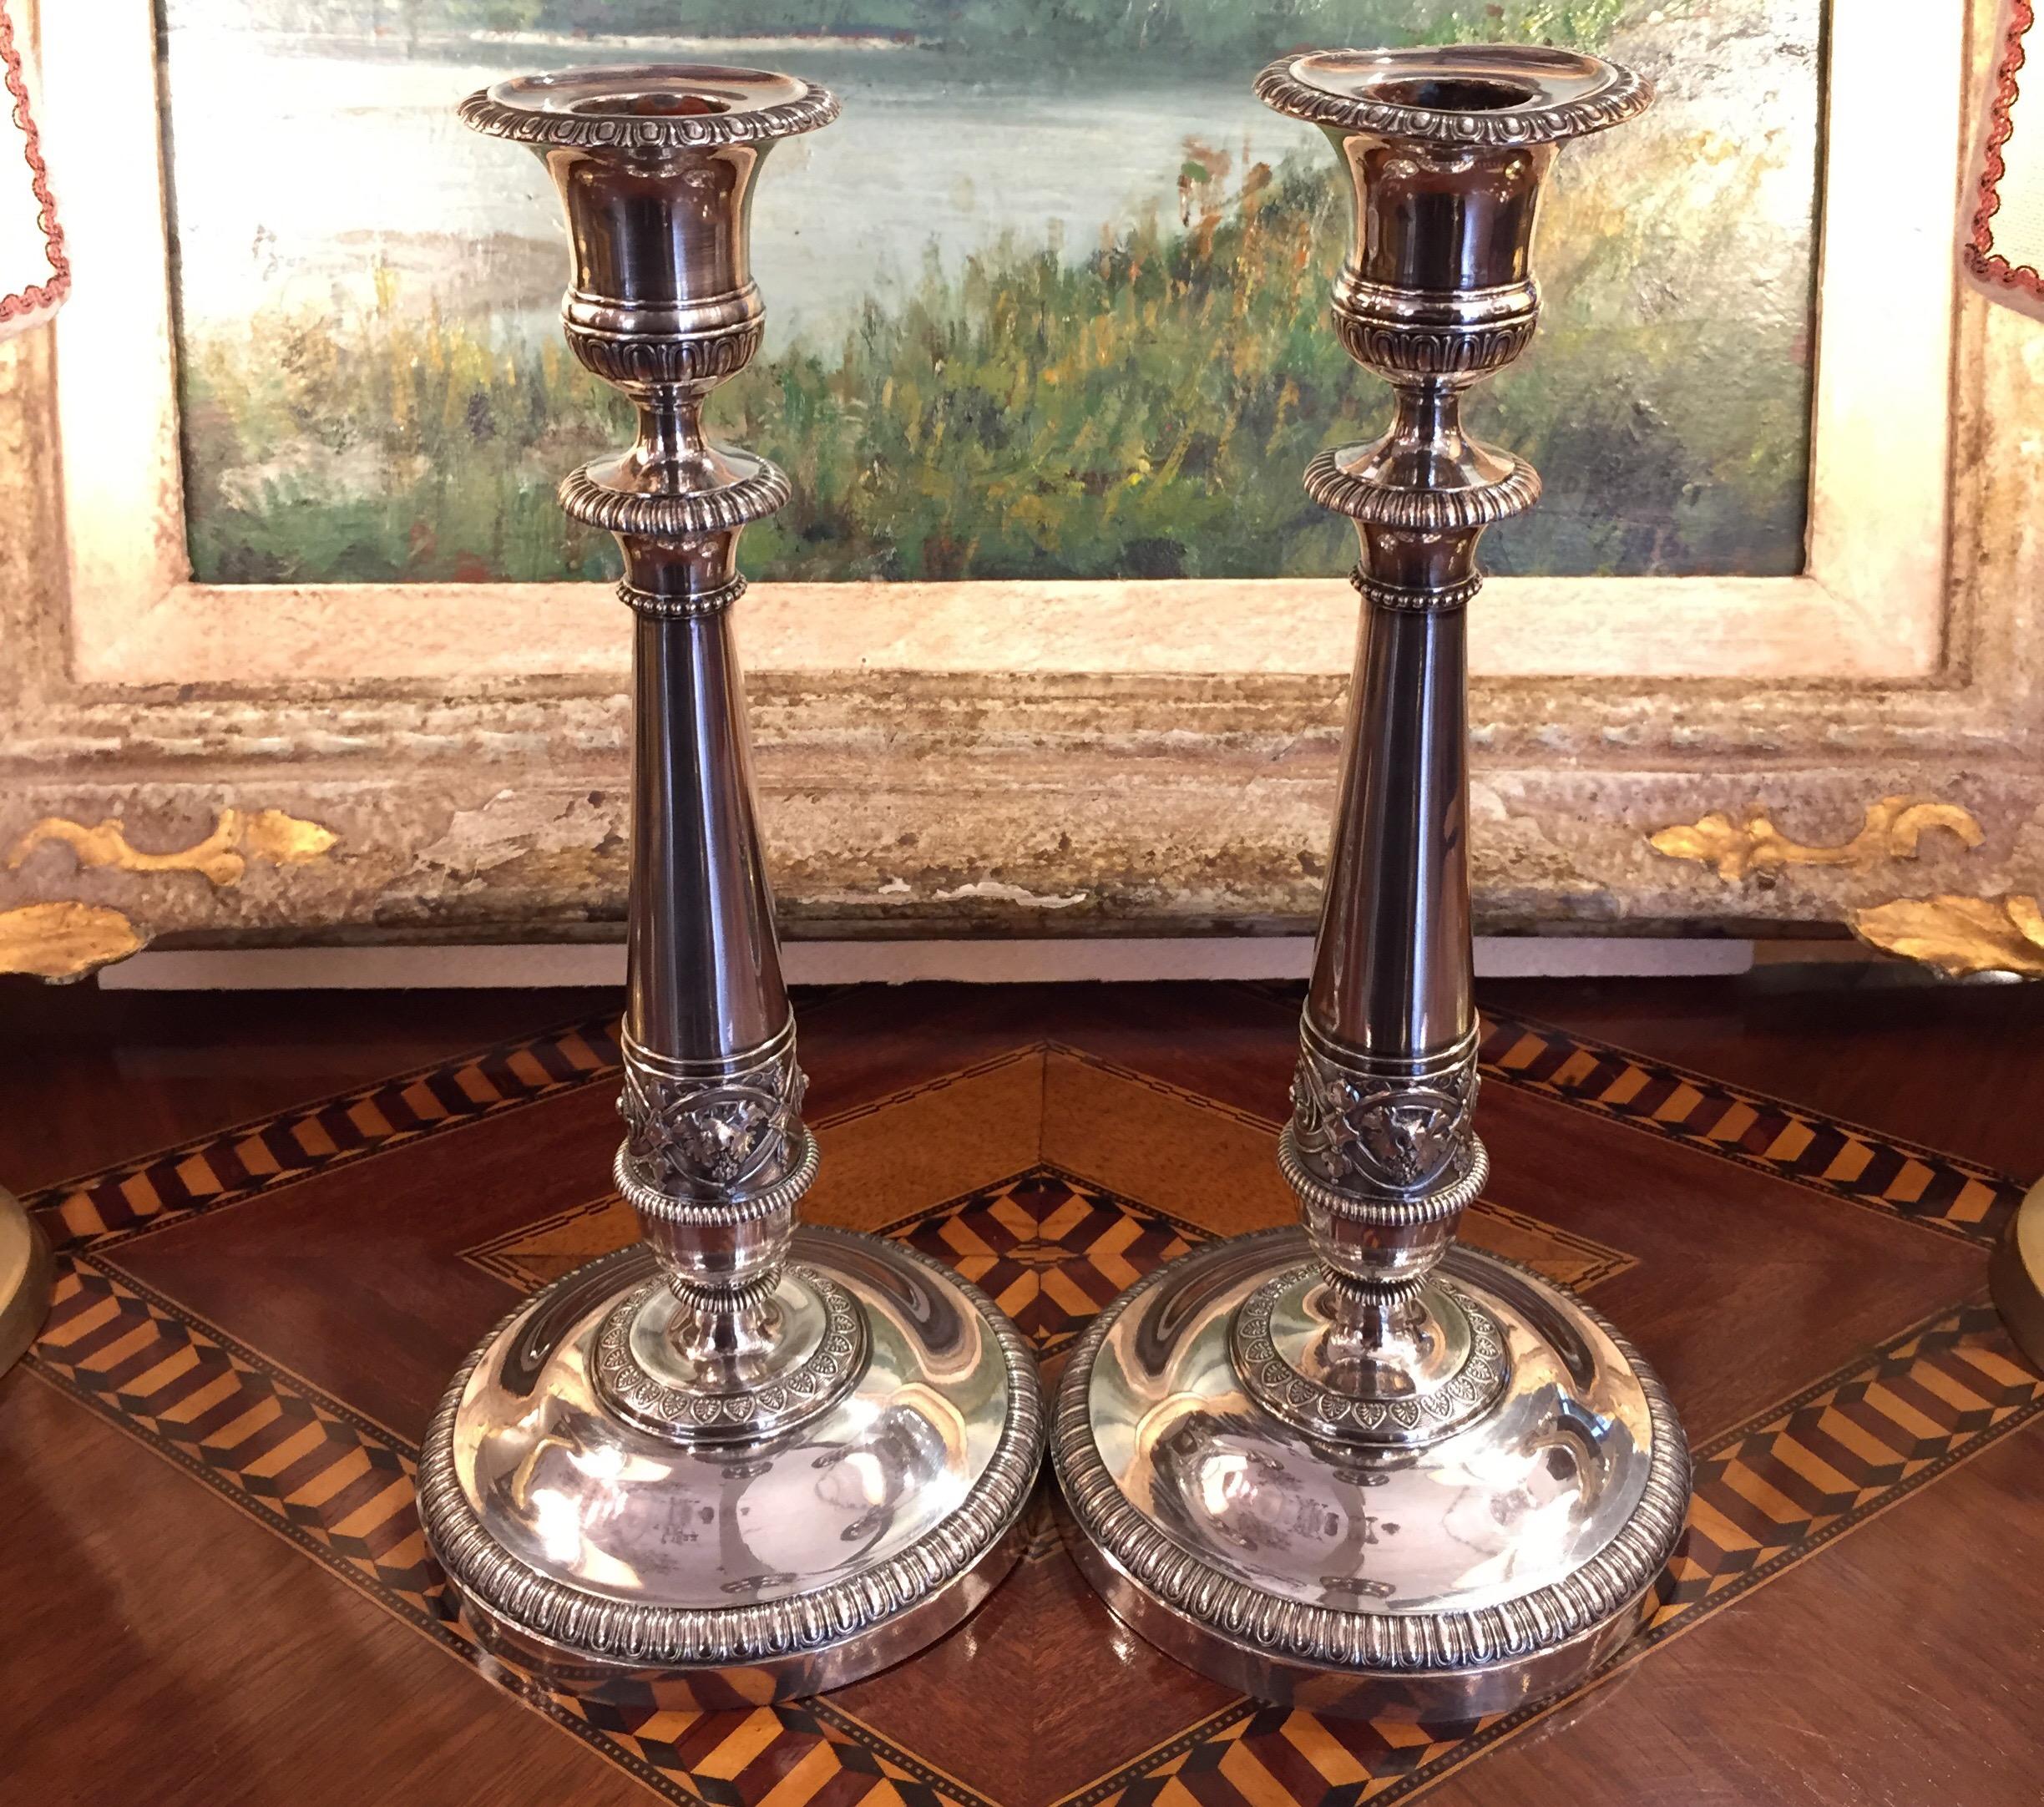 Pair of Neoclassical Silver Circular Candlesticks from Milan 19th Century 1820 8